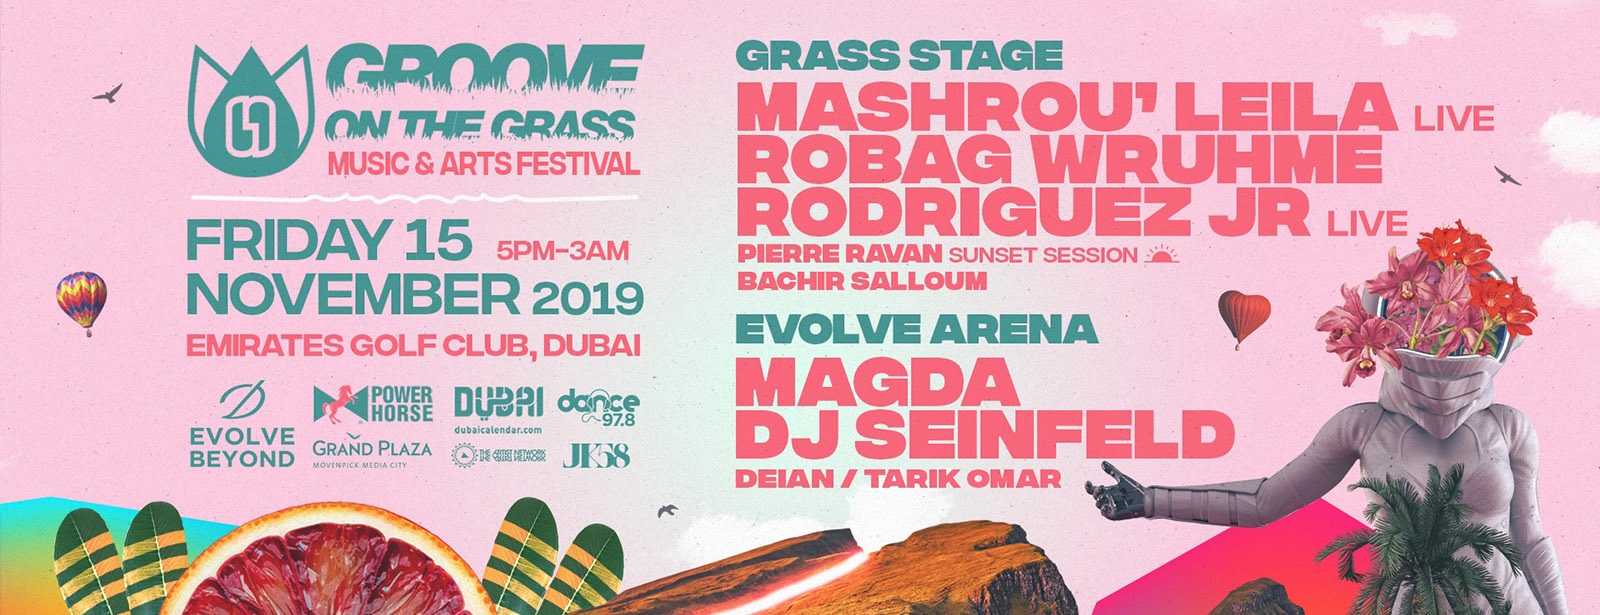 Groove On The Grass – The 8th Anniversary - Coming Soon in UAE